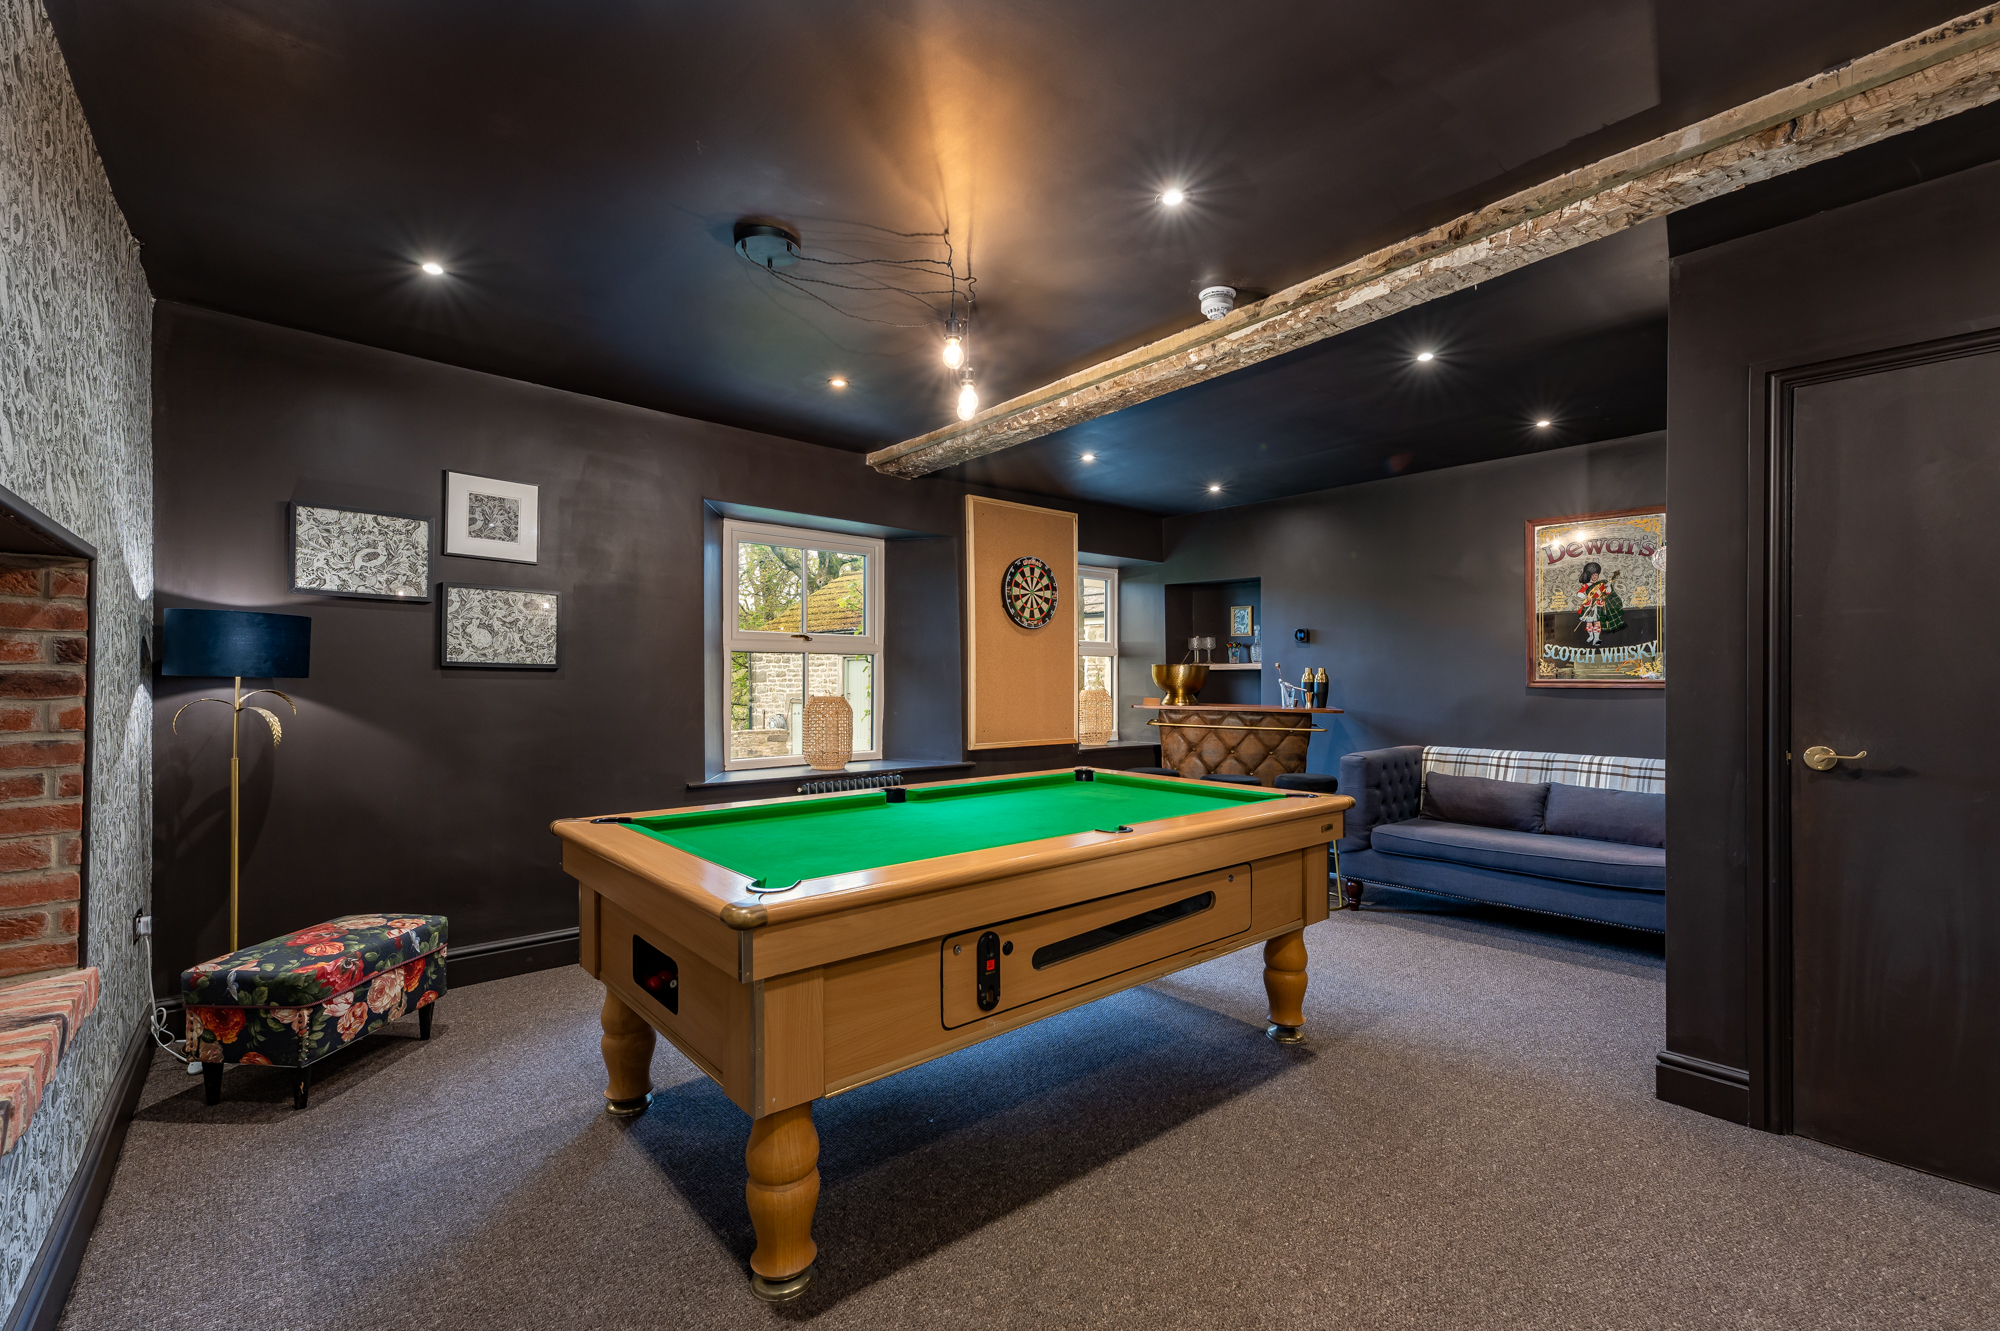 Blackton Grange - great games area with a pool table